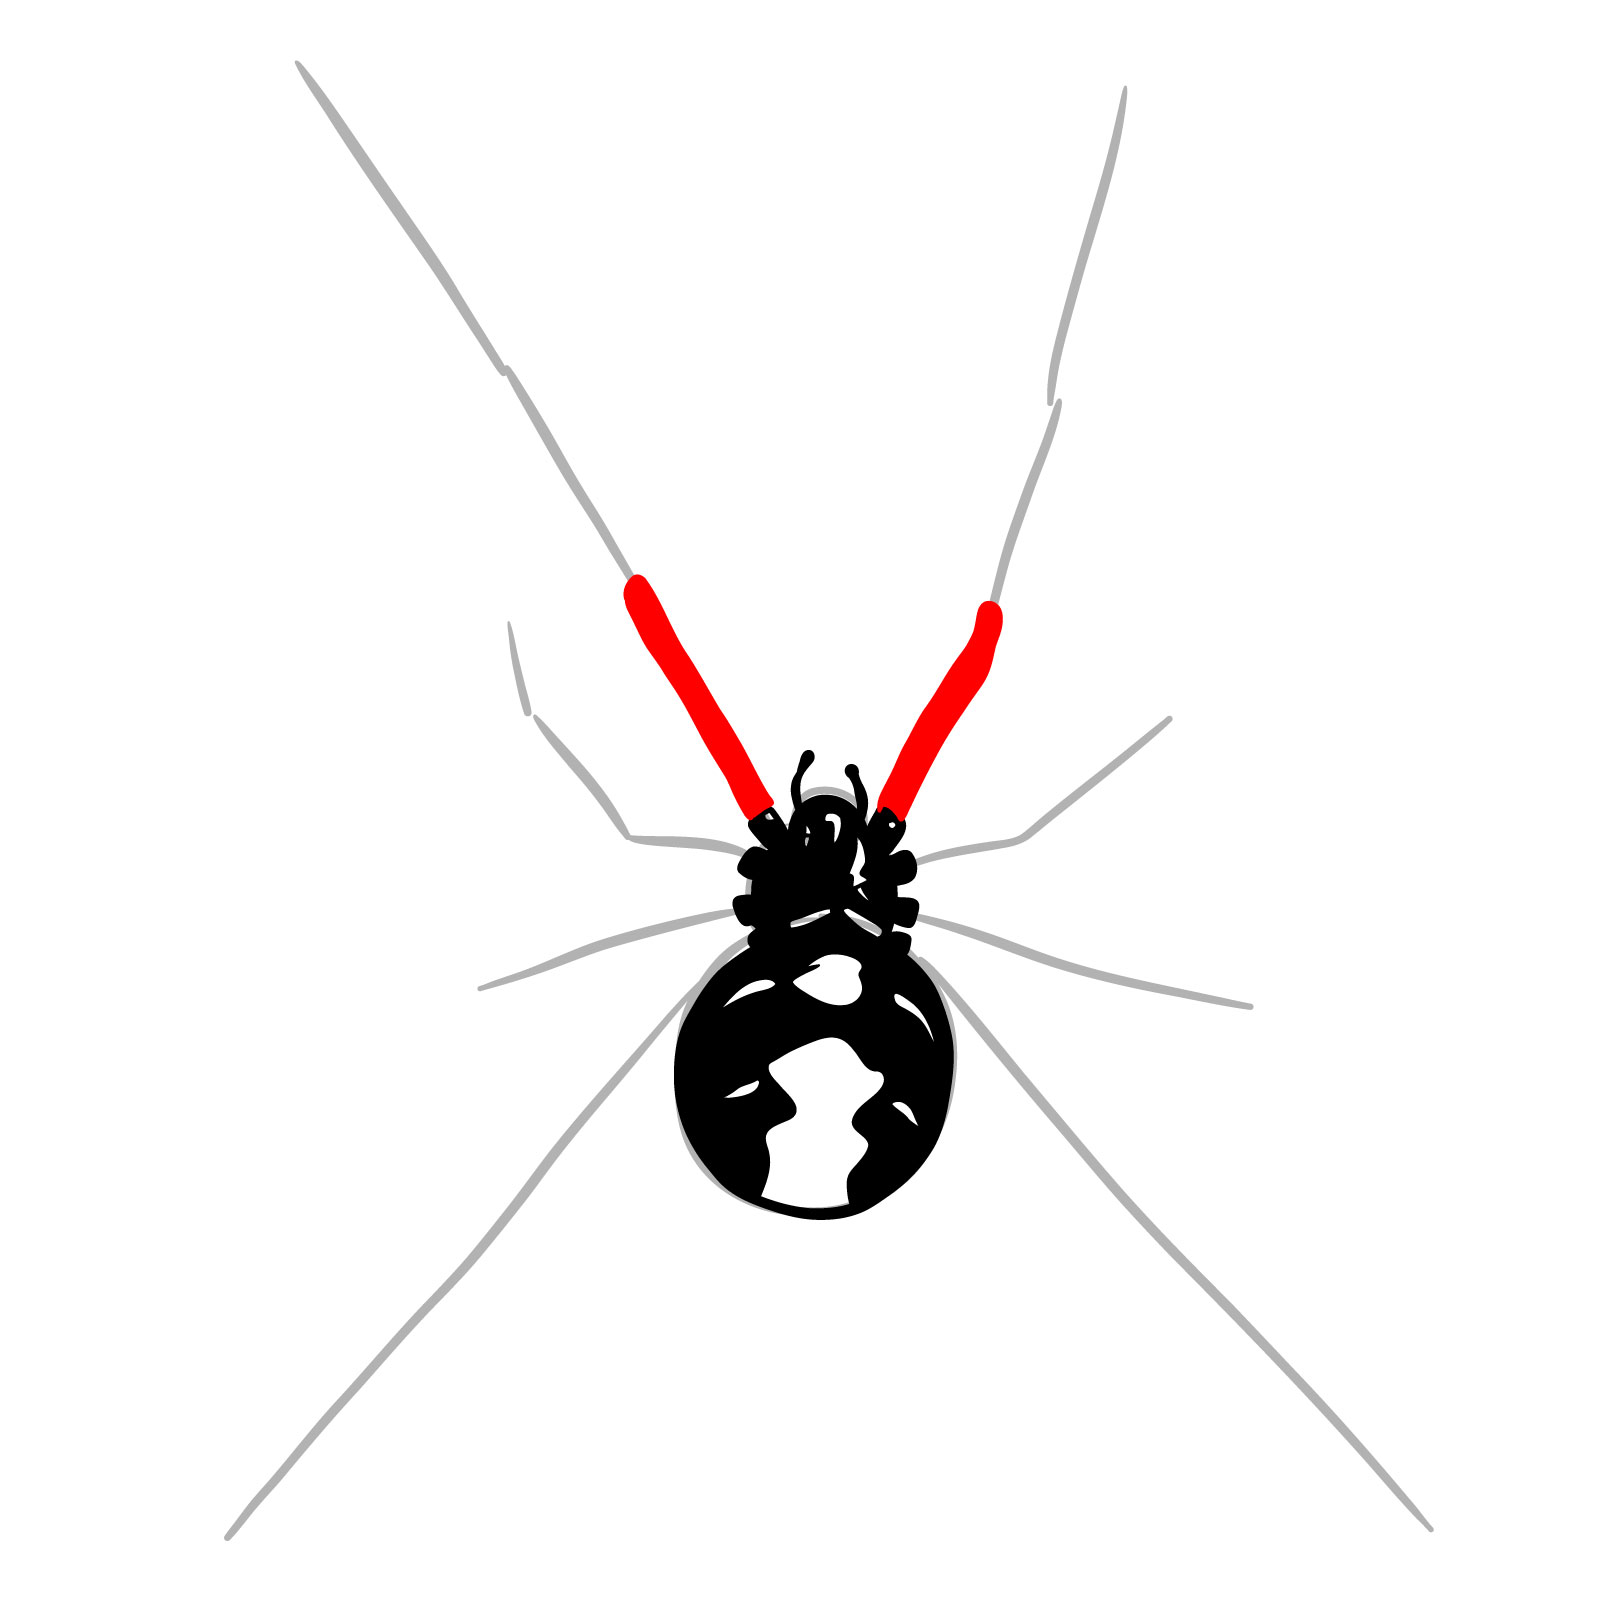 How to draw a Black Widow Spider - step 11